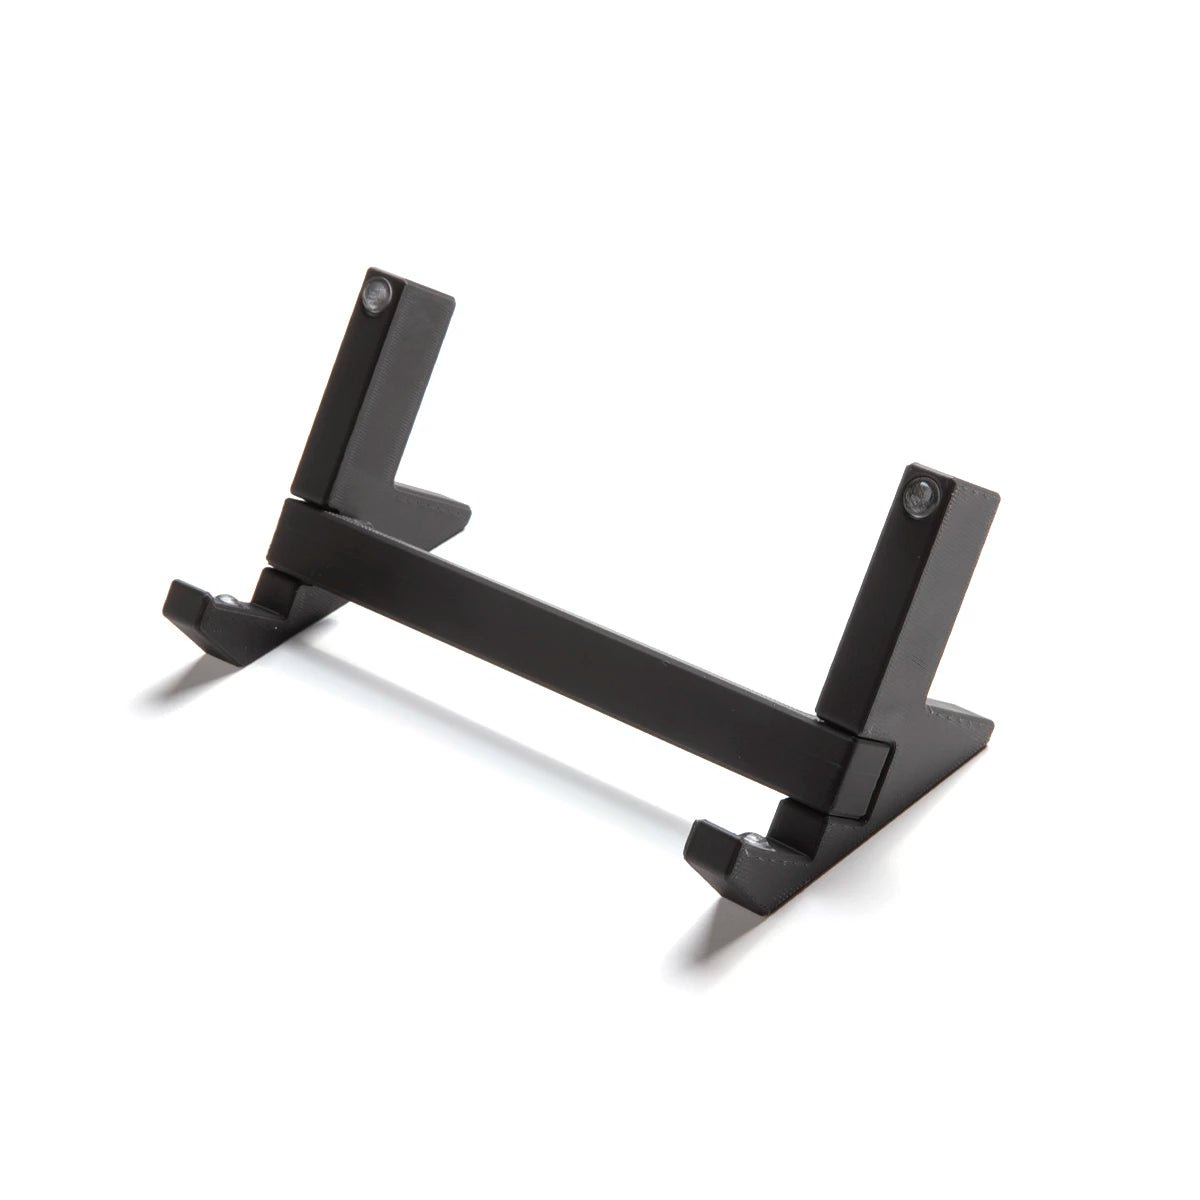 K2 F01 Wall Mount and Stand Holder Price in BD